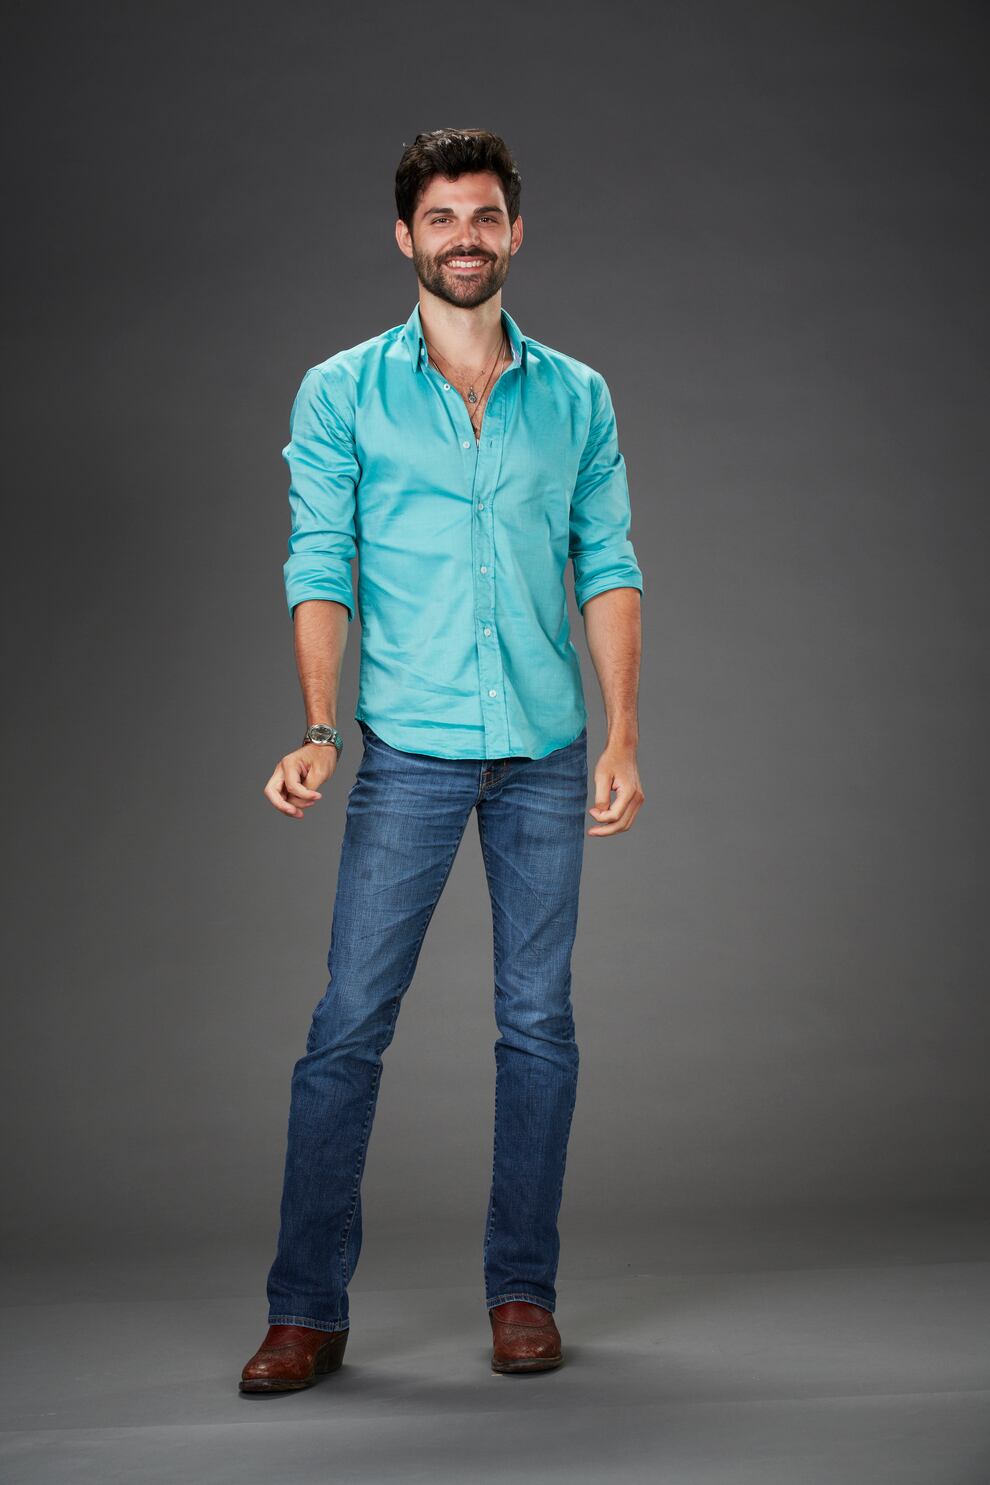 The Voice: Cody Belew's Official Photos Photo: 244581 - NBC.com